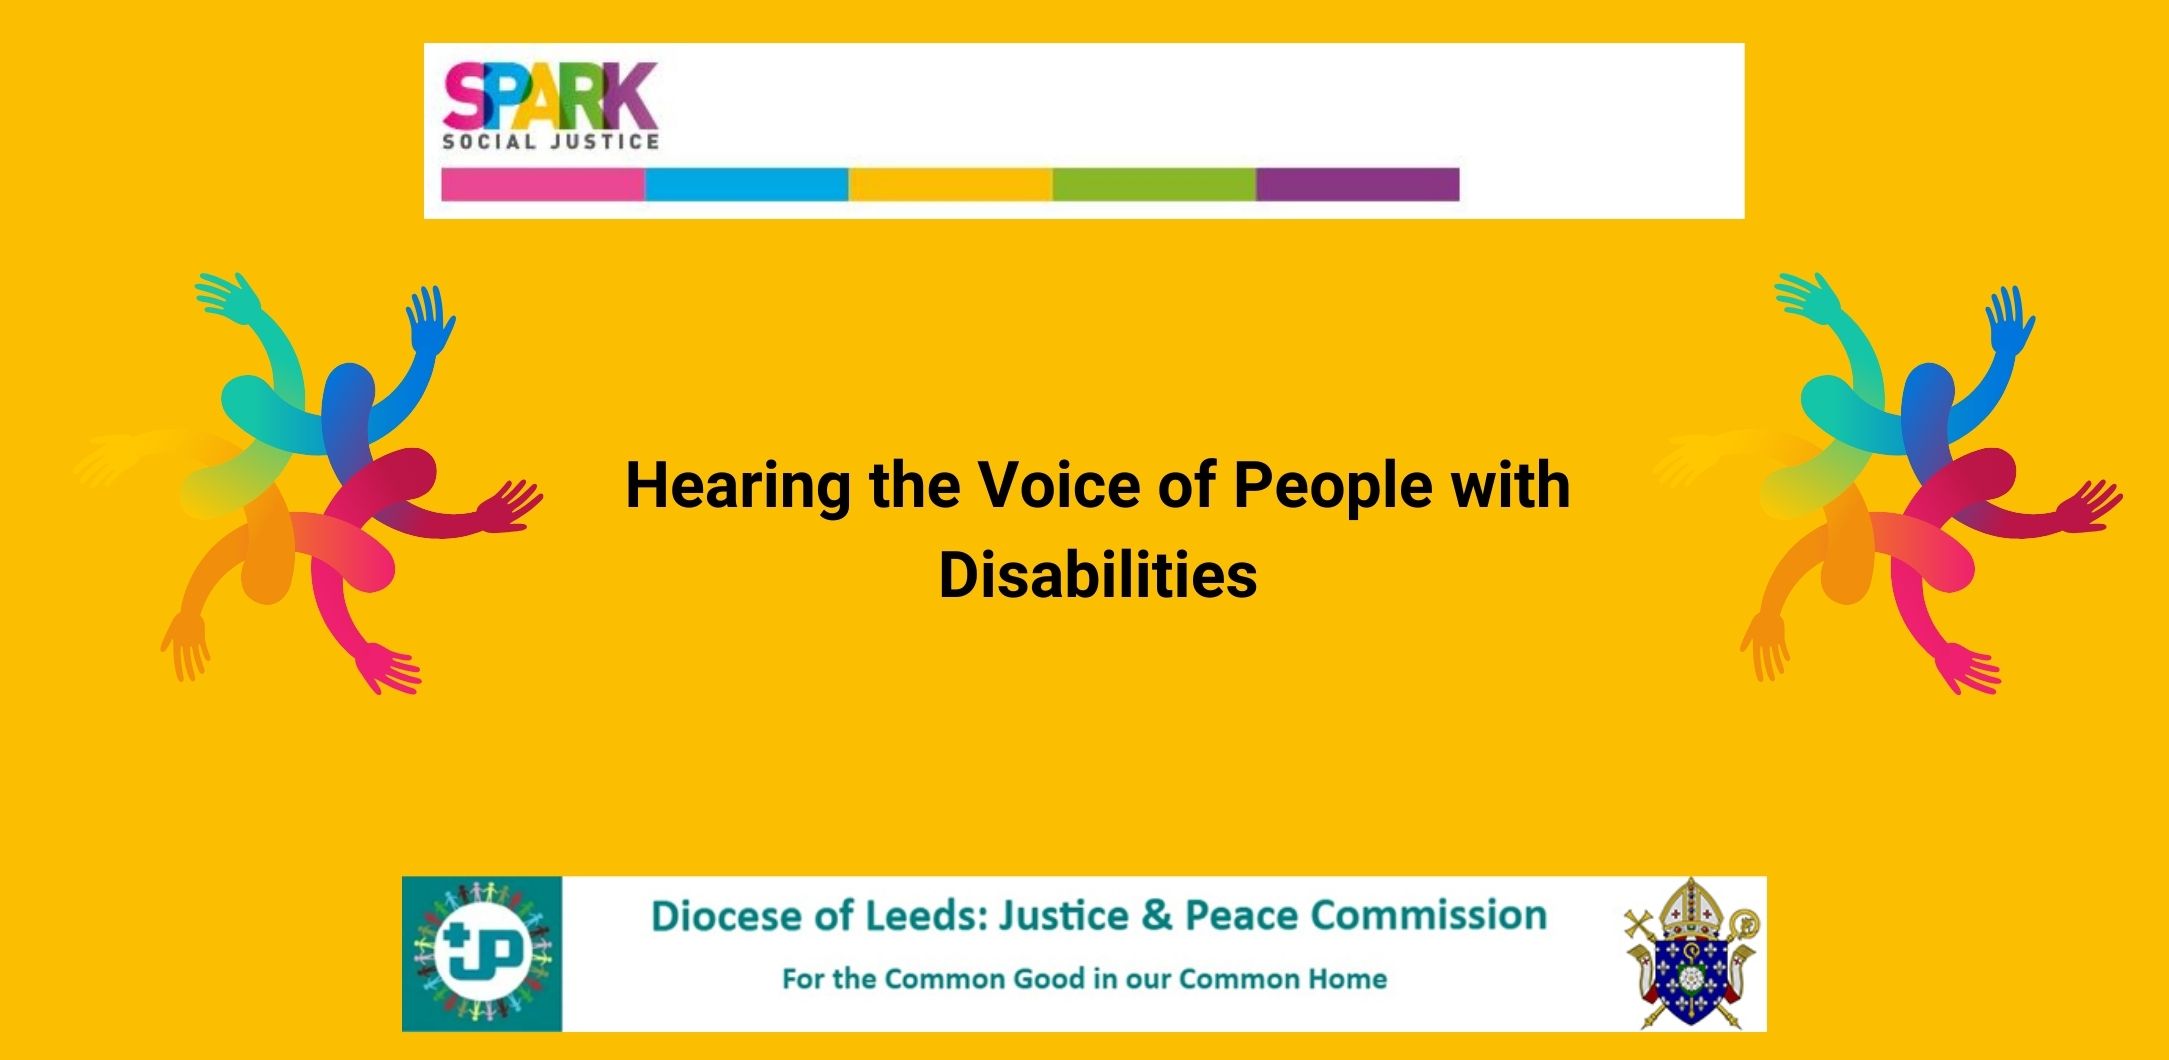 Listening to People with Disabilities (via Zoom)